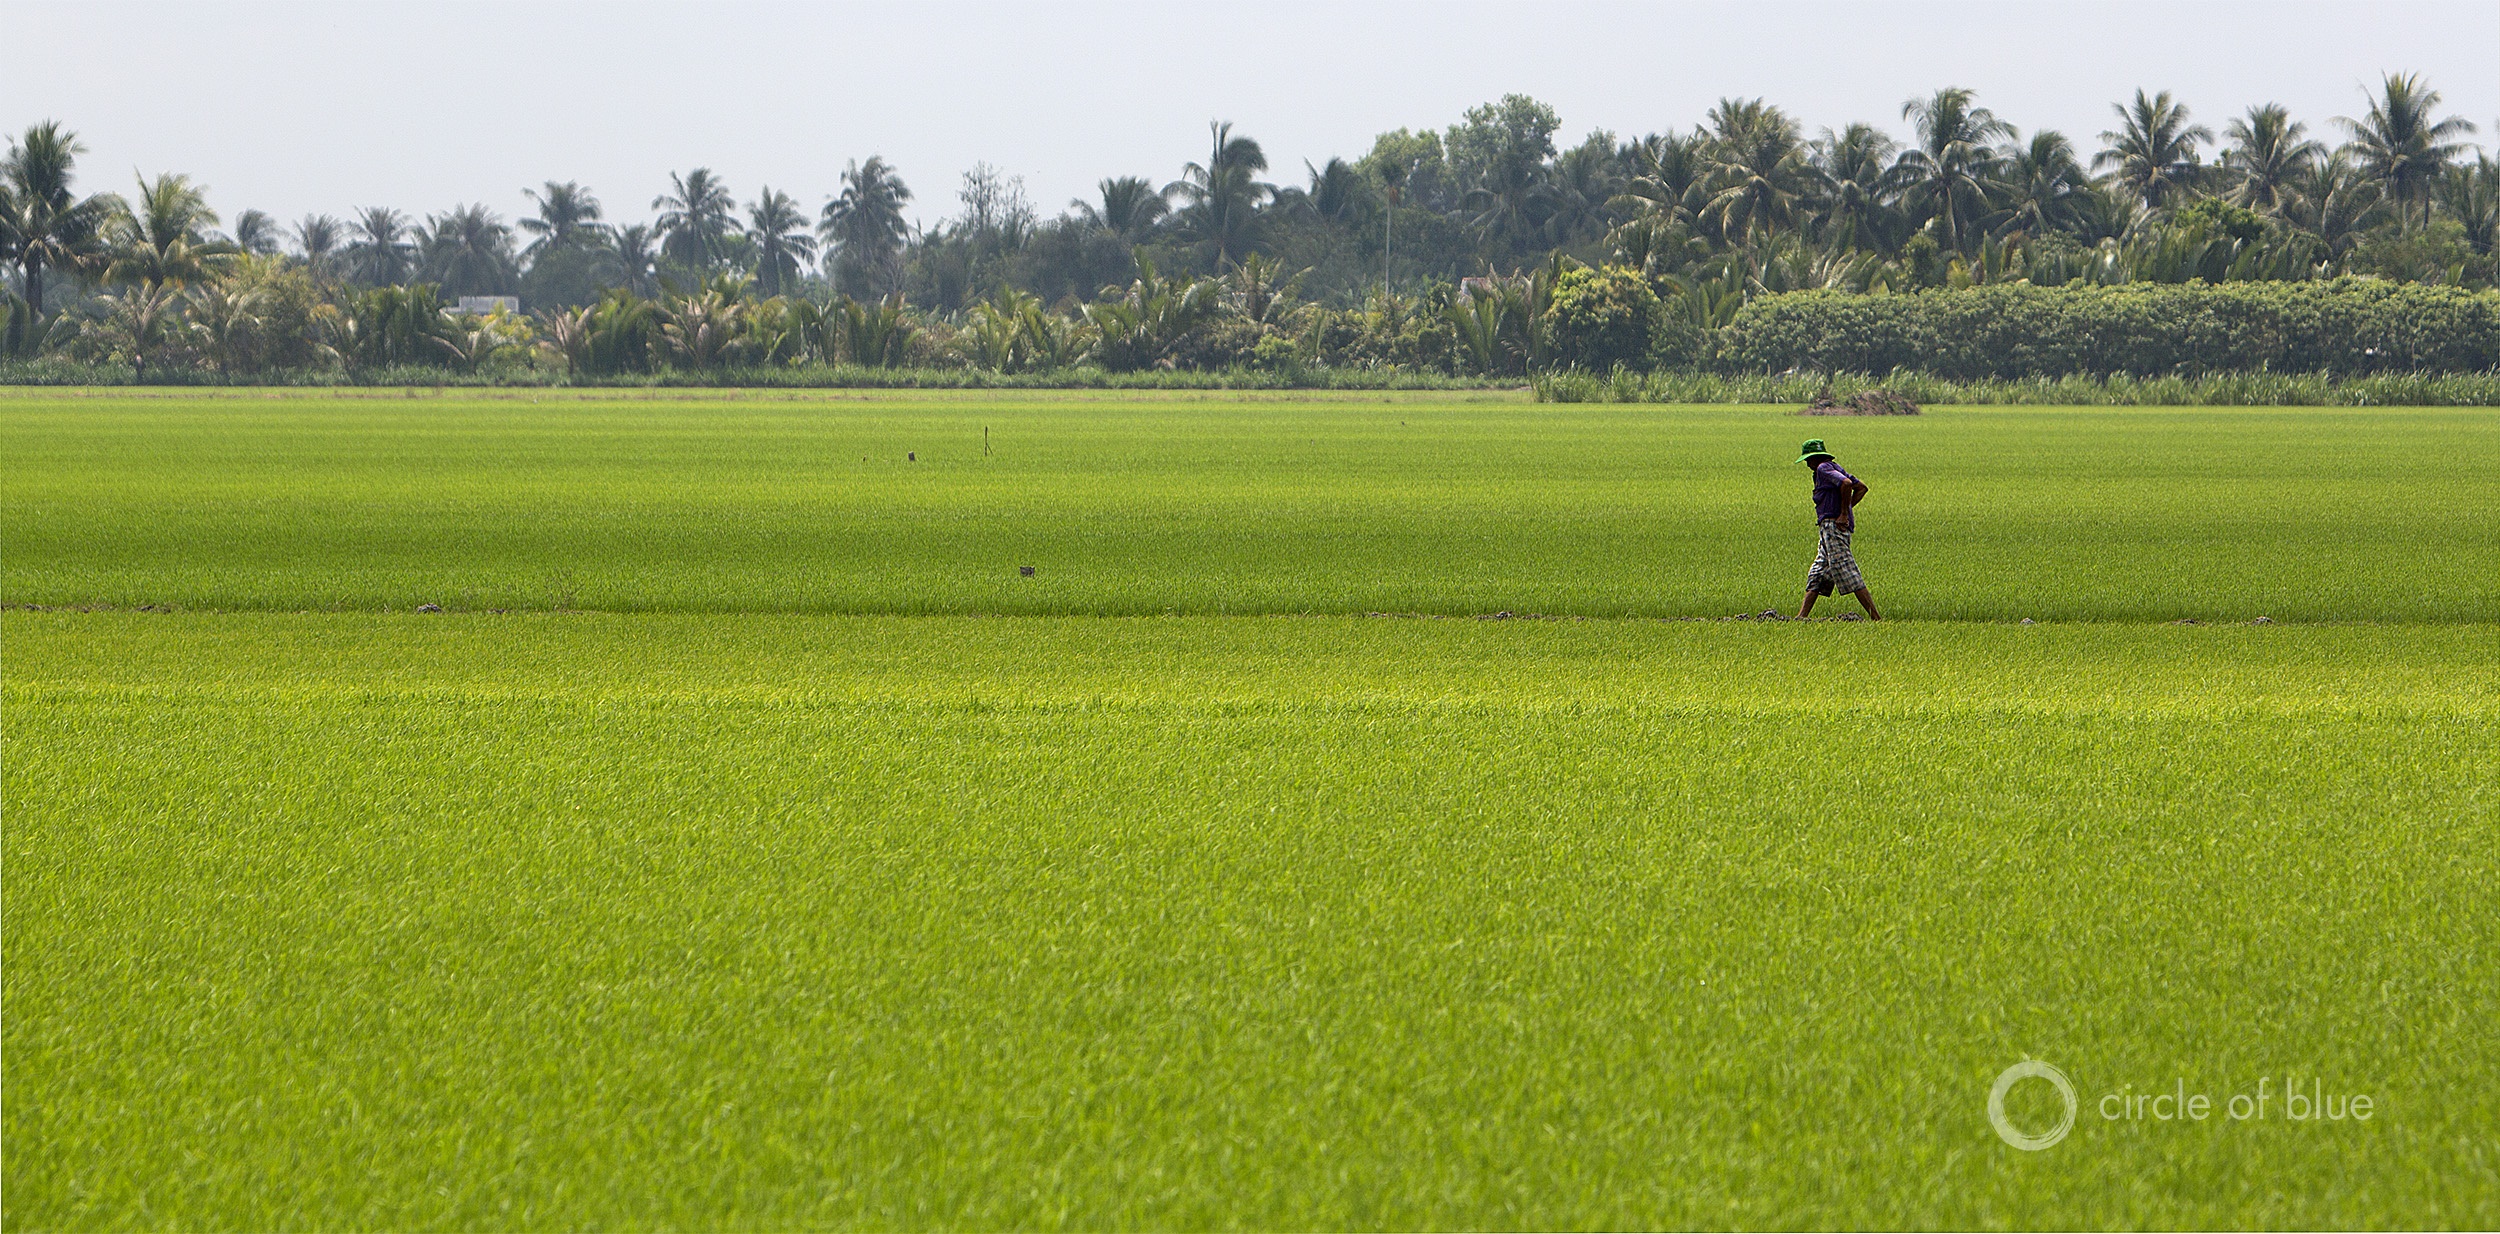 Rice fields in the Mekong Delta, near Can Tho, Vietnam. An increase in groundwater irrigation in the region could affect groundwater availability across national borders. Photo © J. Carl Ganter / Circle of Blue